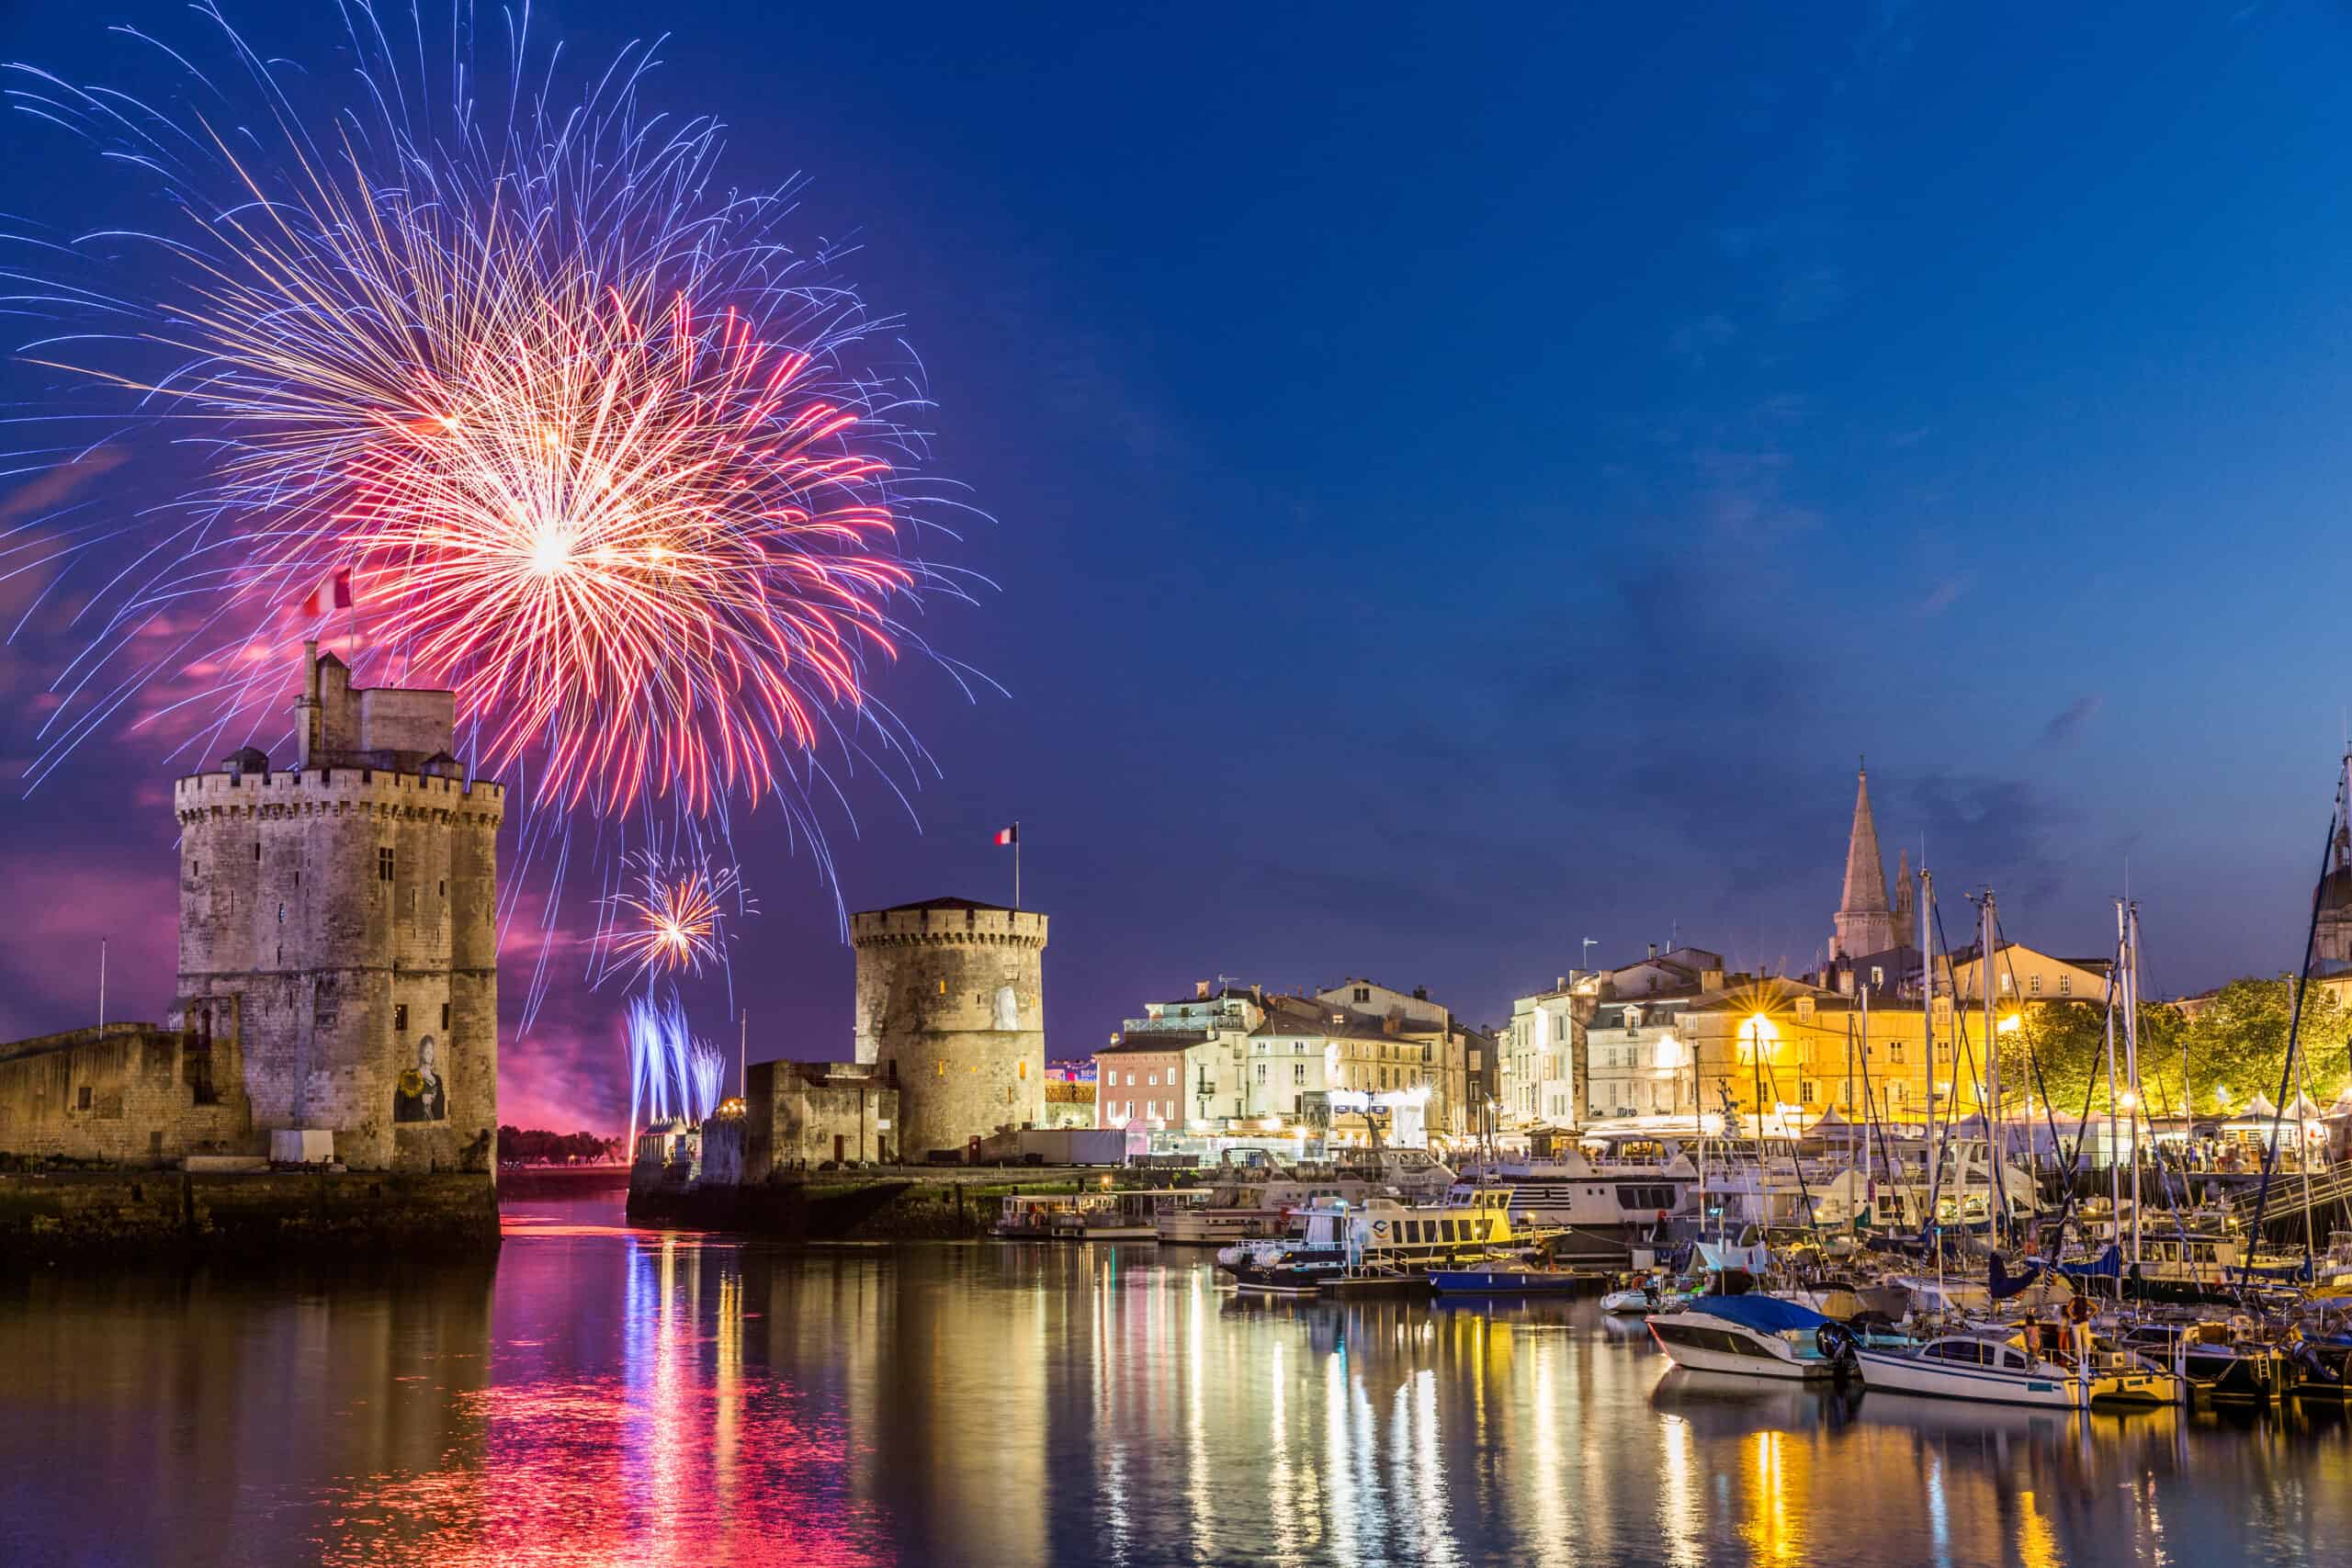 LA ROCHELLE, FRANCE - JULY 14, 2018: Fireworks at La Rochelle during French National Day